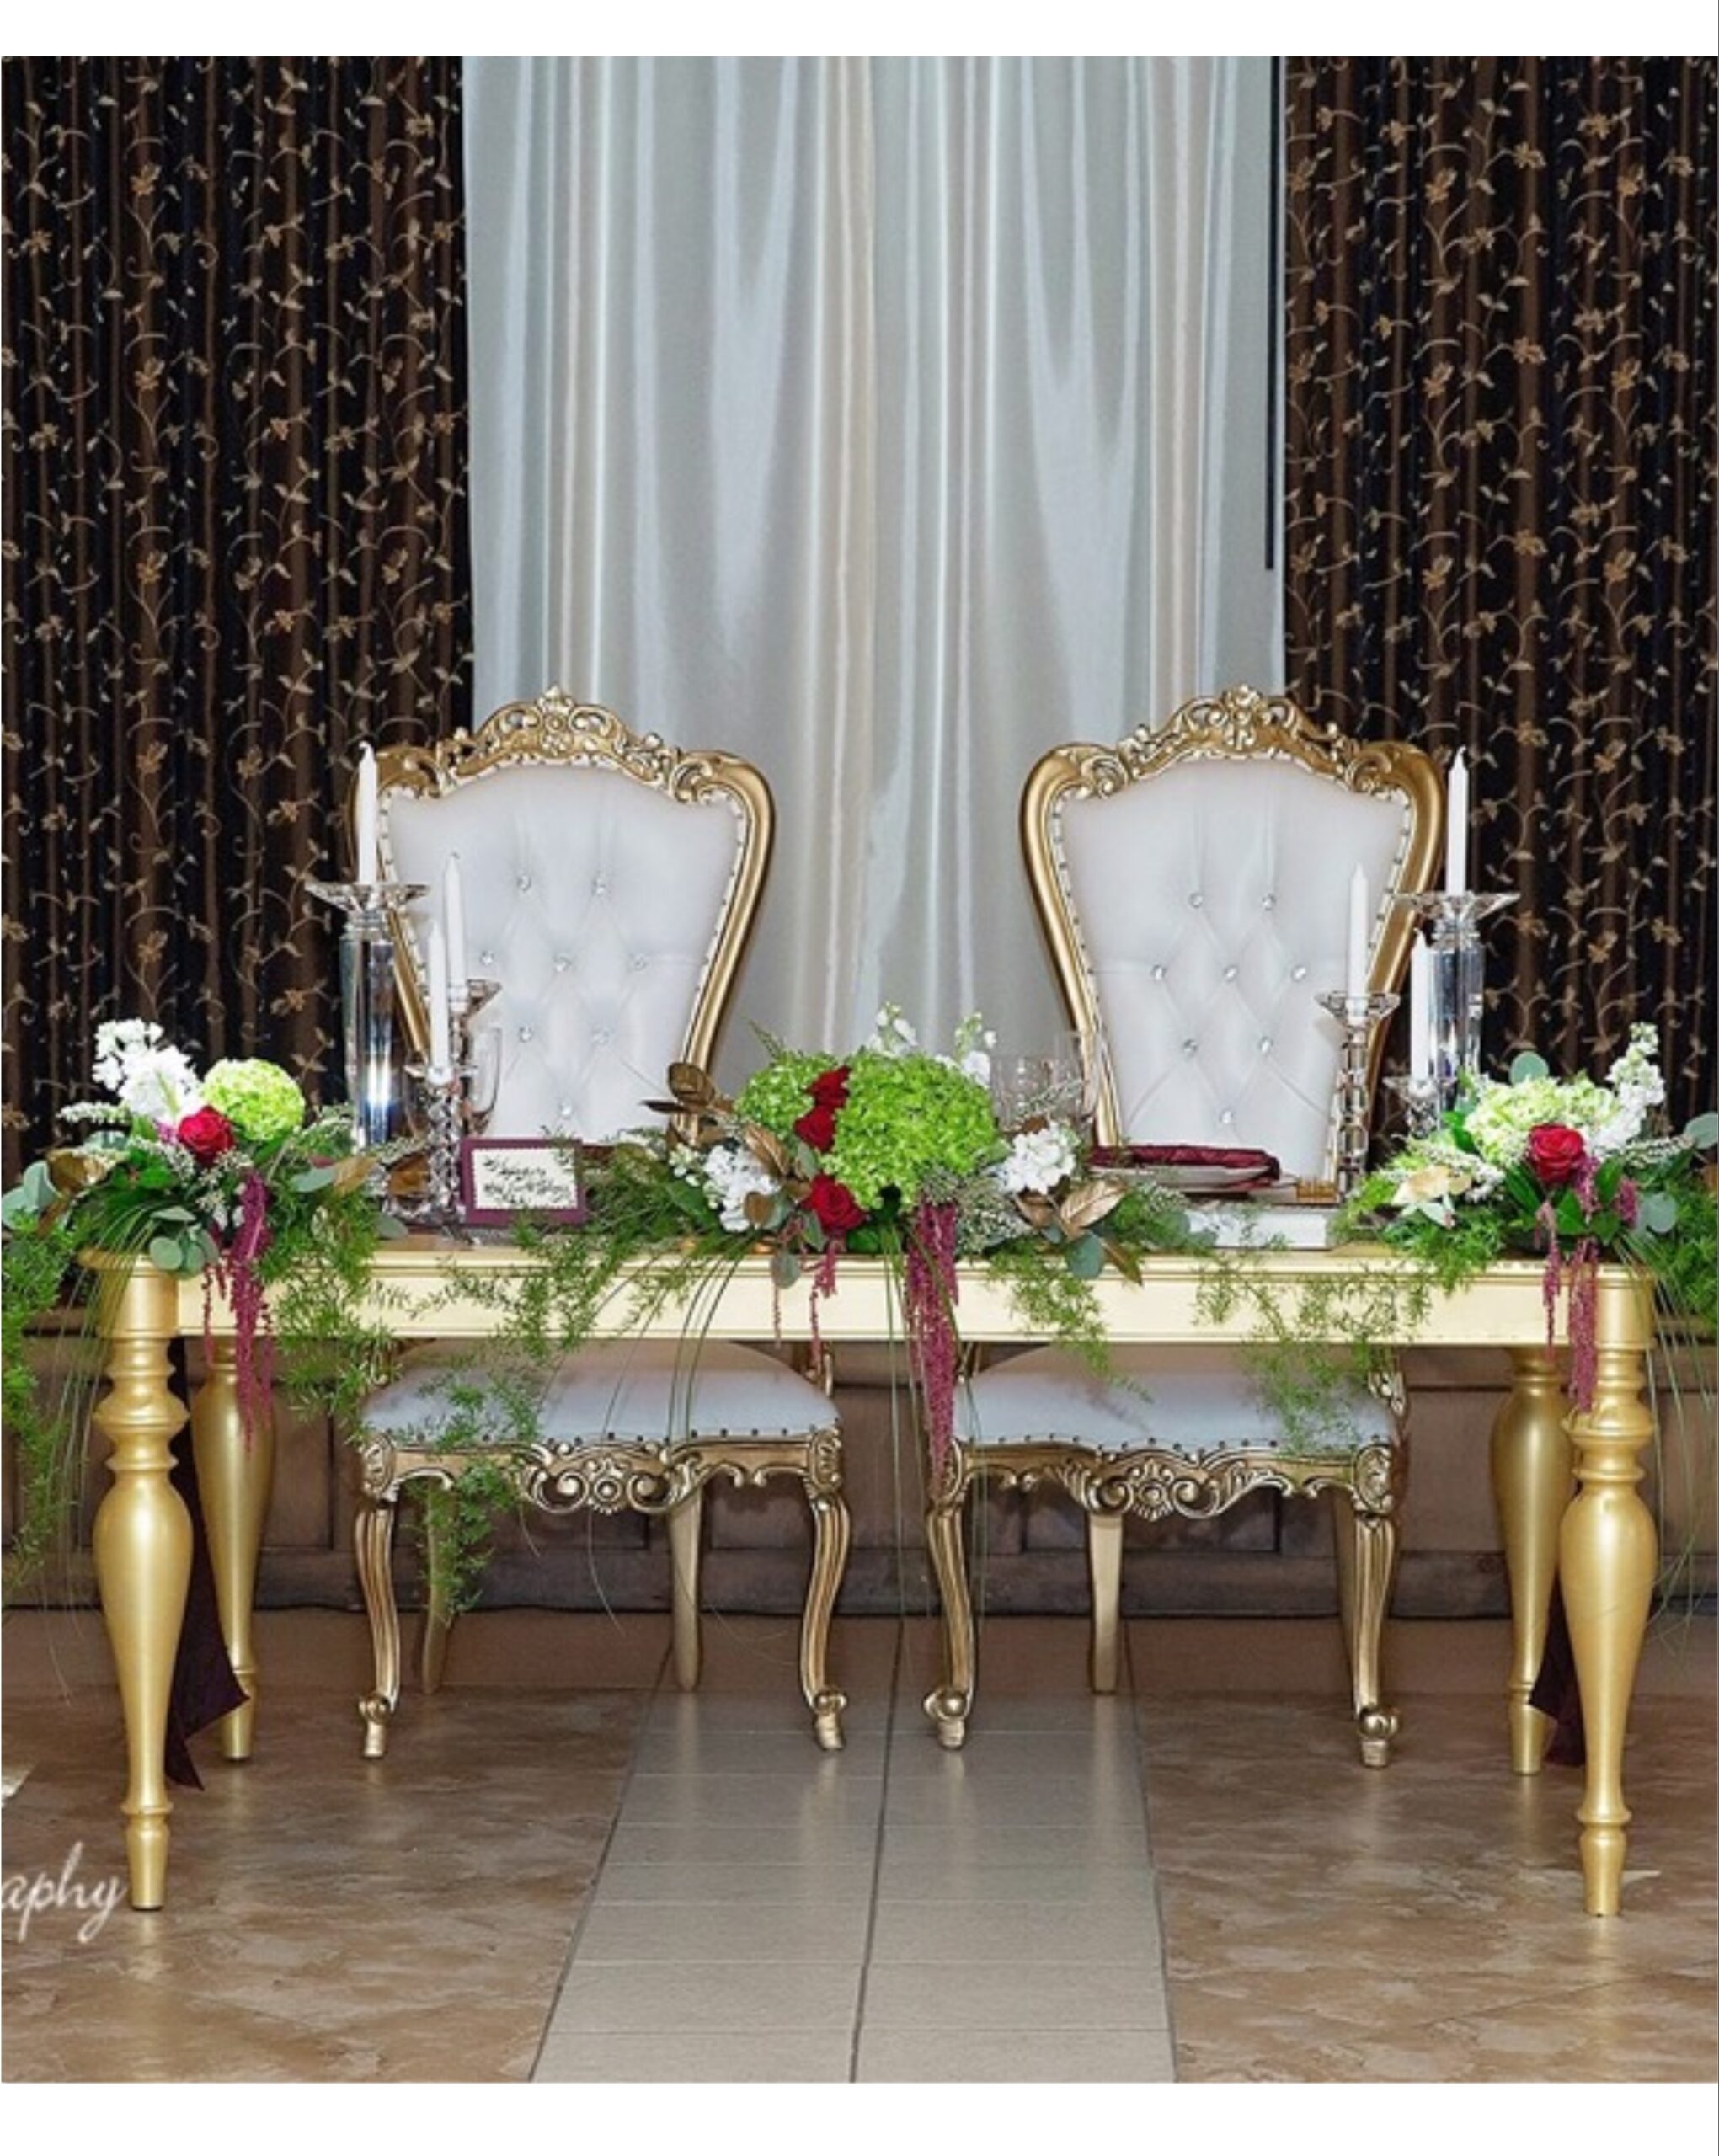 Sweetheart table with throne chairs